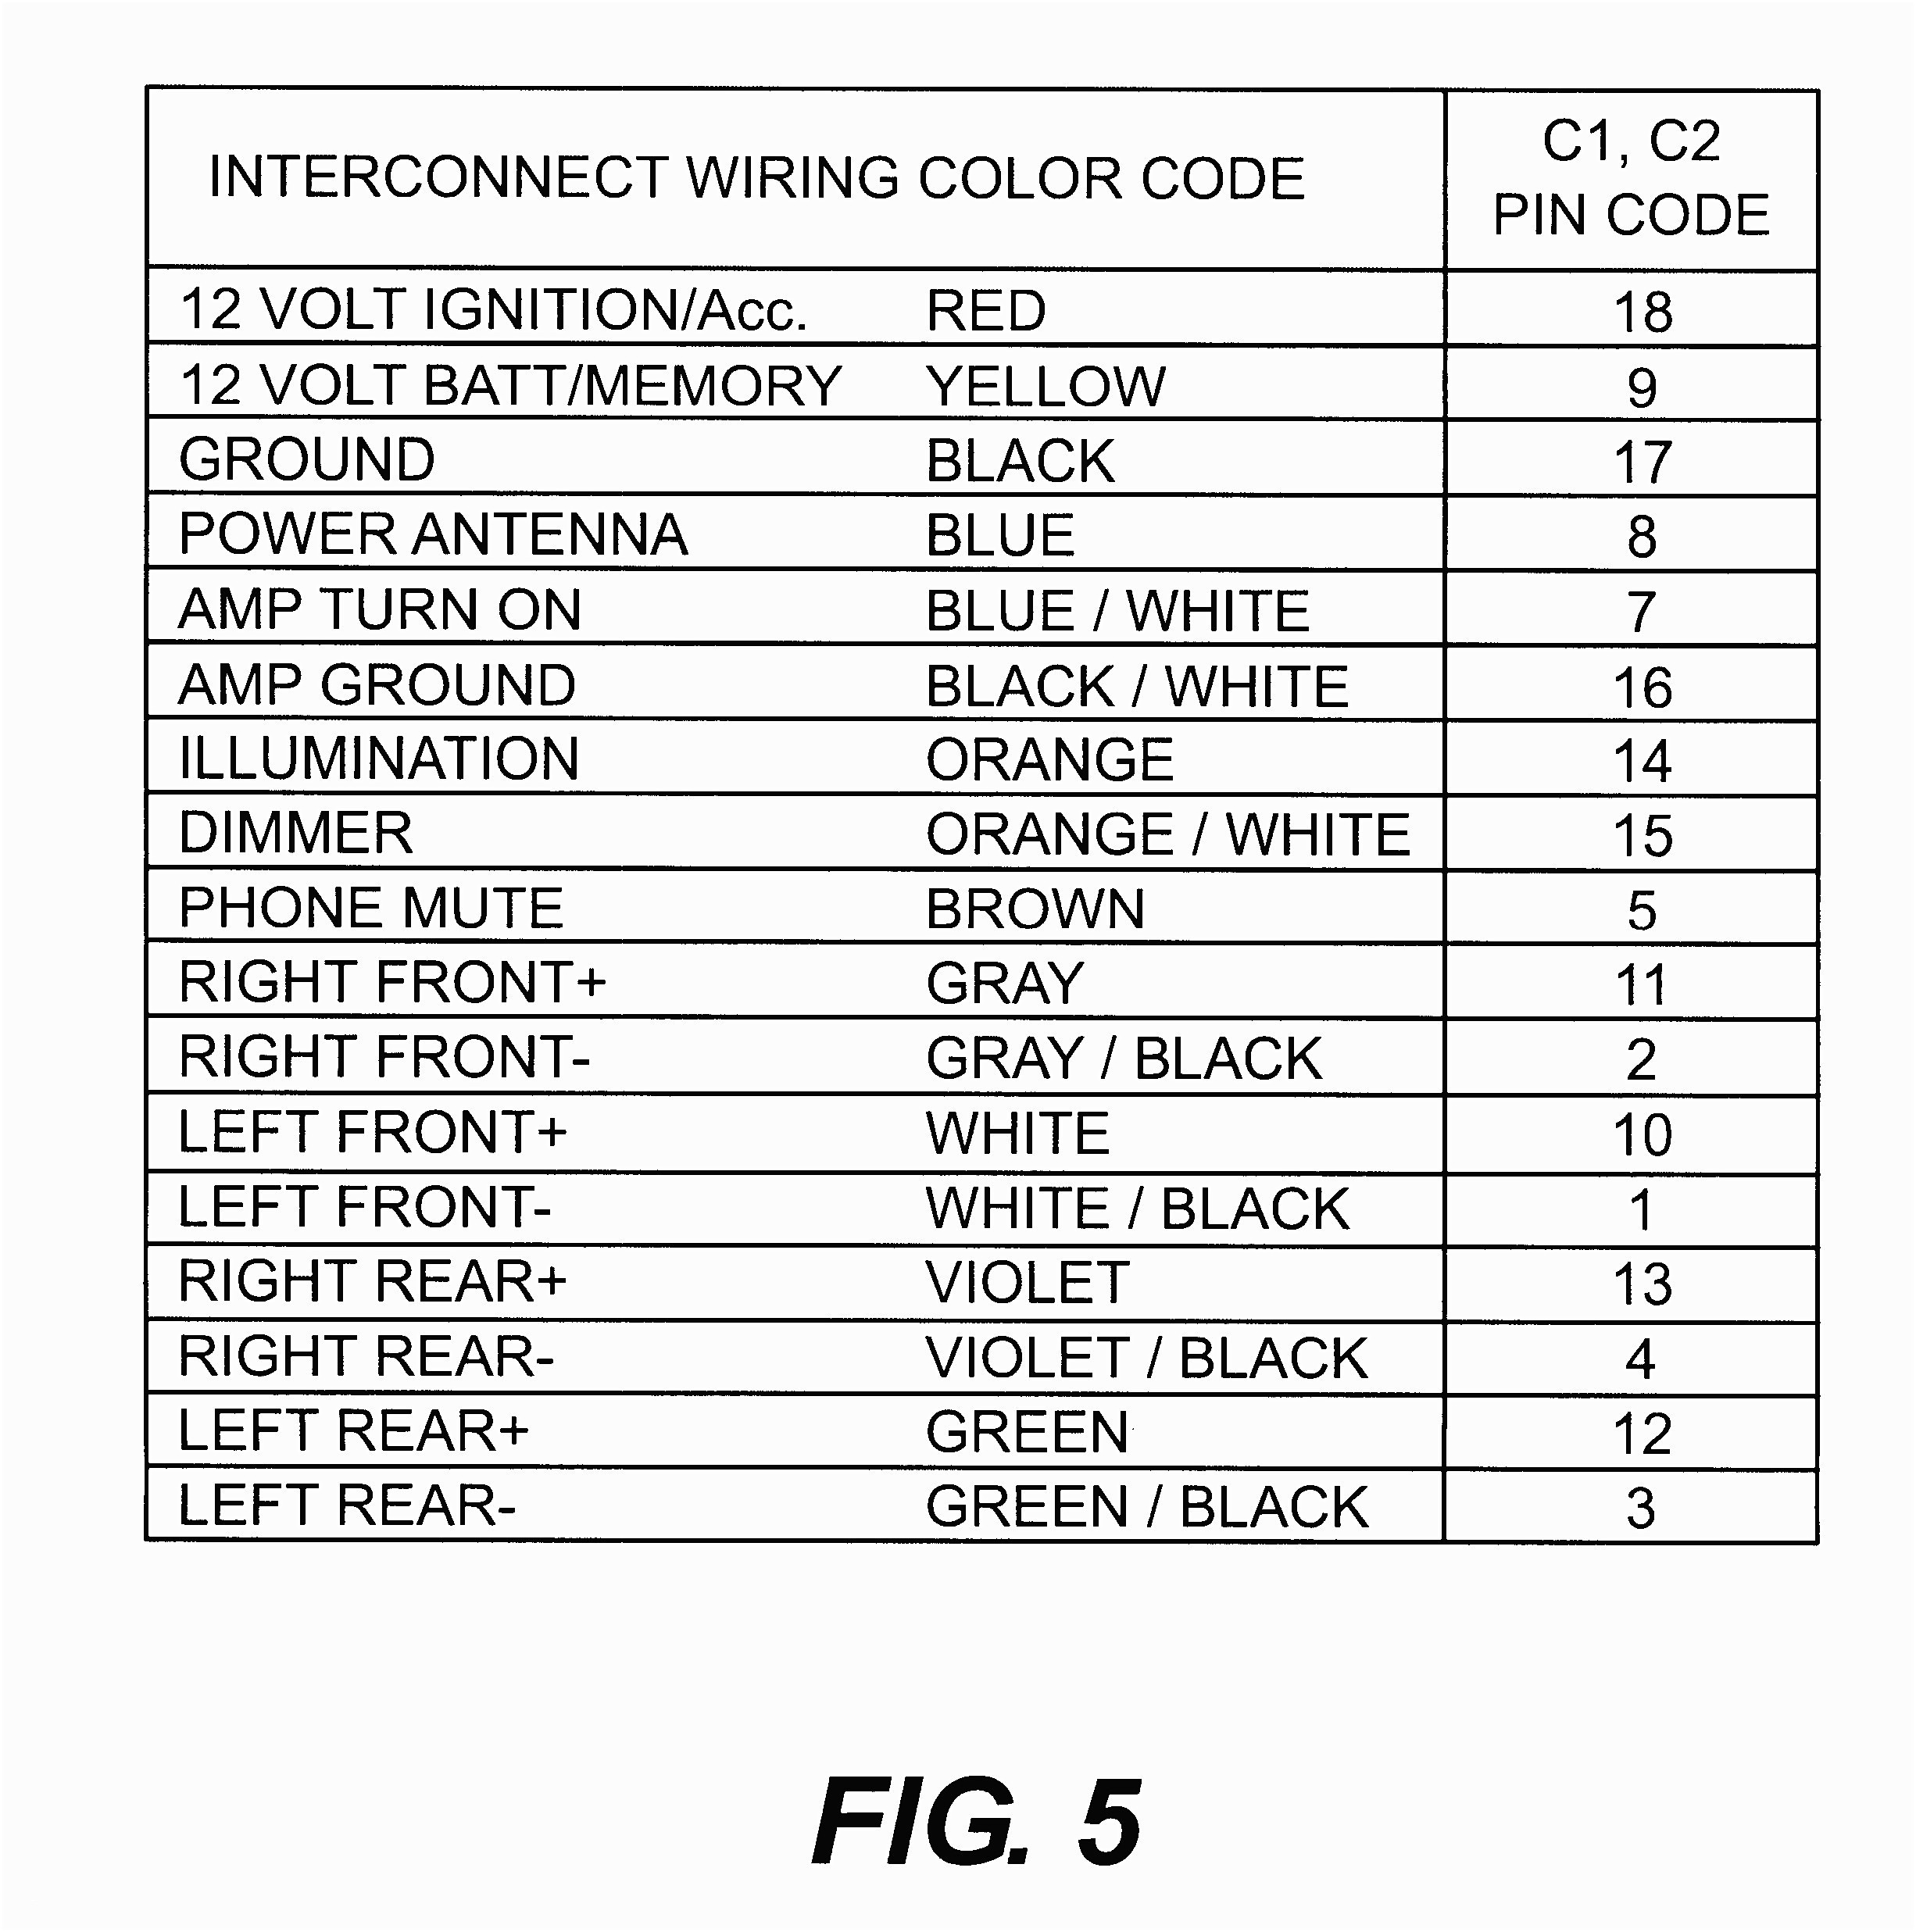 Jvc Car Stereo Wiring Diagram Color Wiring Diagram Jvc Radio Inspirationa Jvc Car Stereo Wiring Diagram Of Jvc Car Stereo Wiring Diagram Color